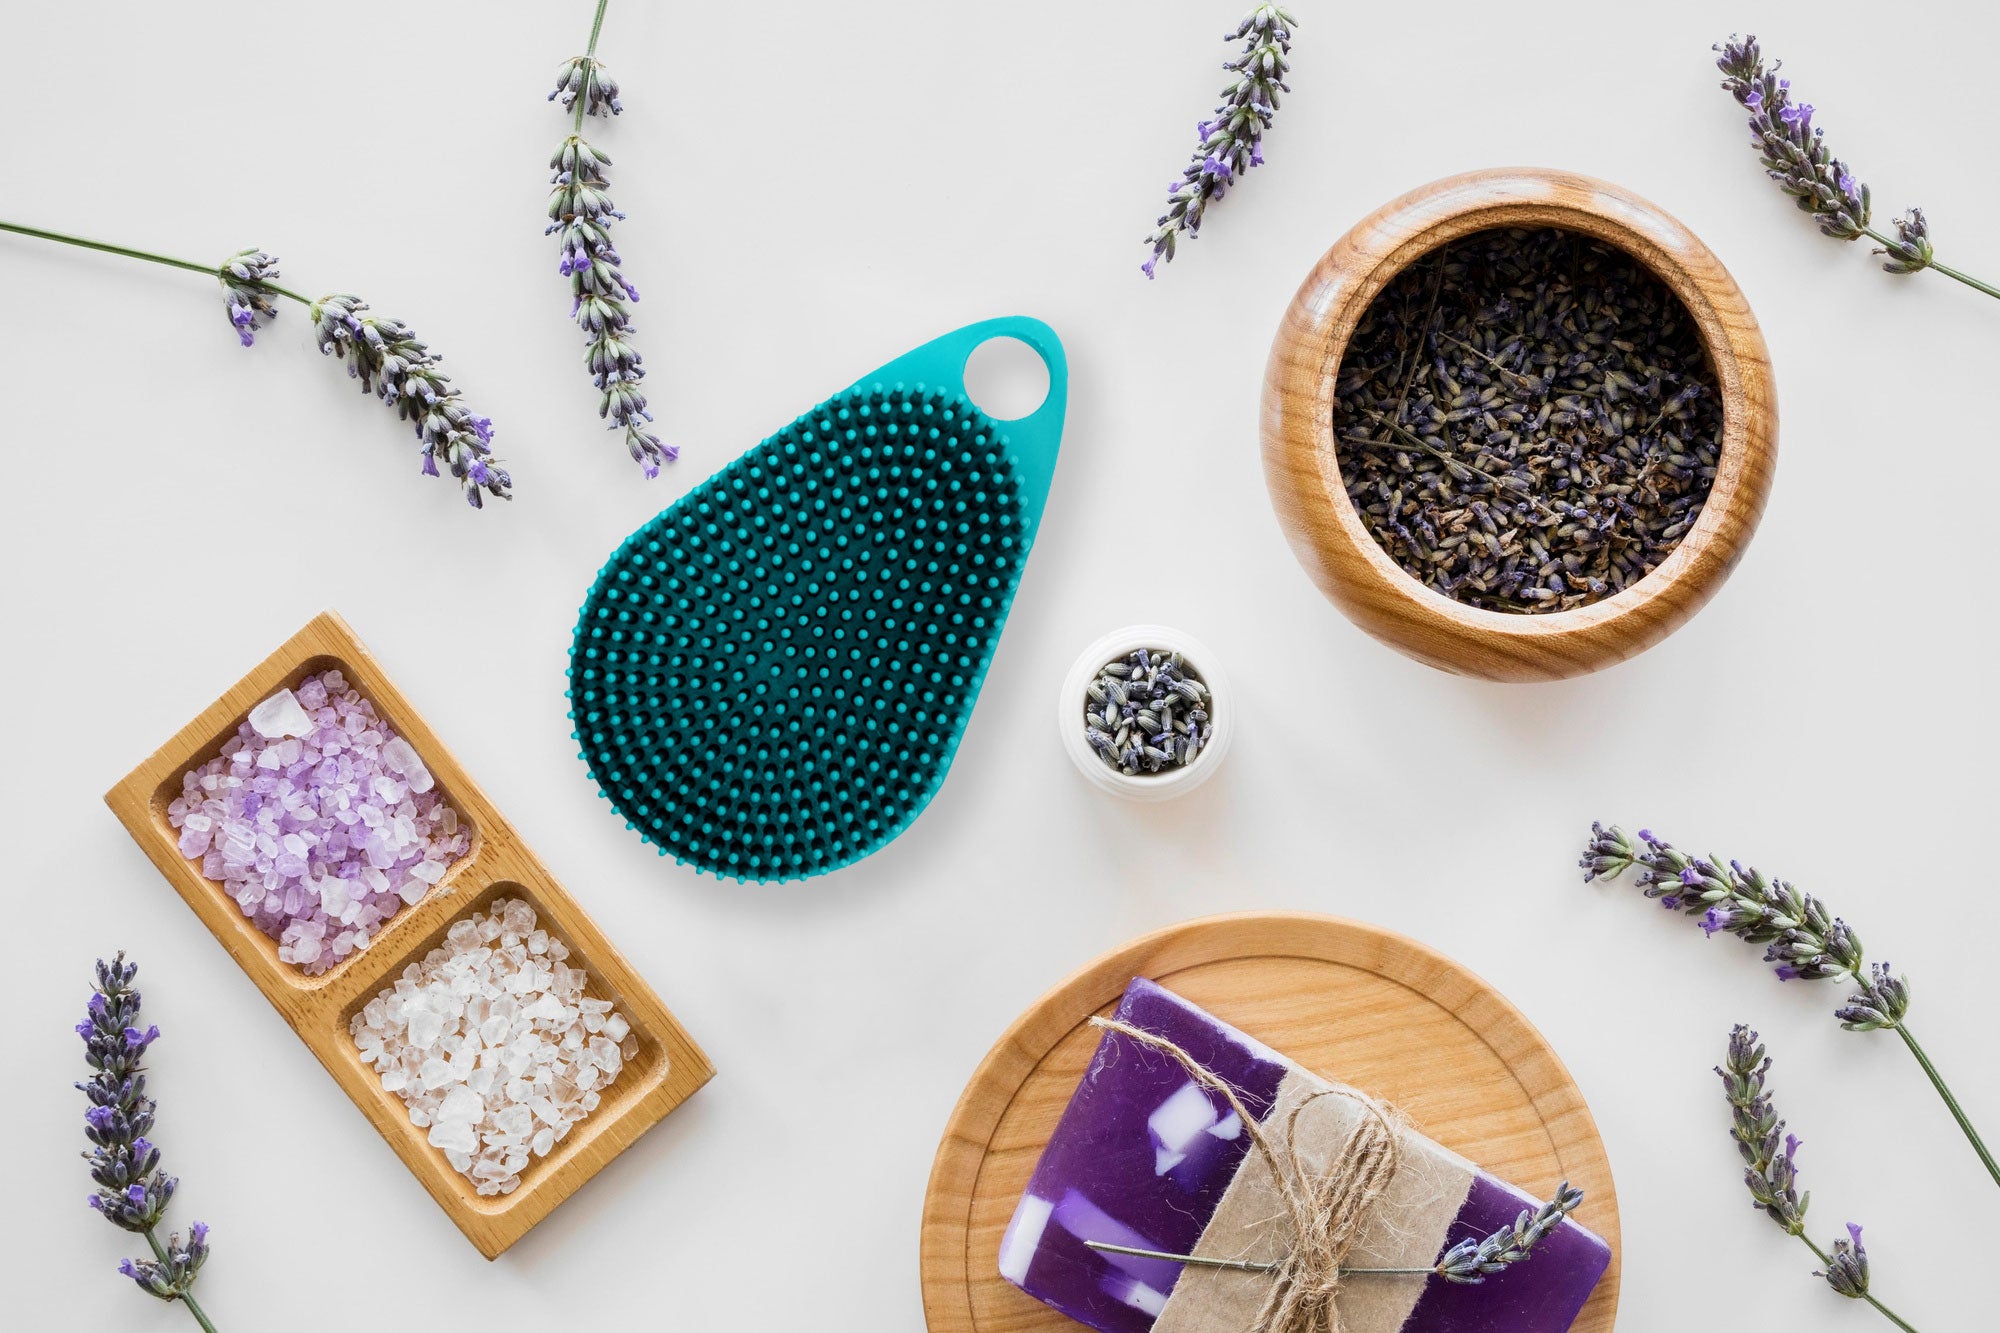 Luxuriate In An At Home Spa With Diy Lavender Body Scrub And Scrub Dub